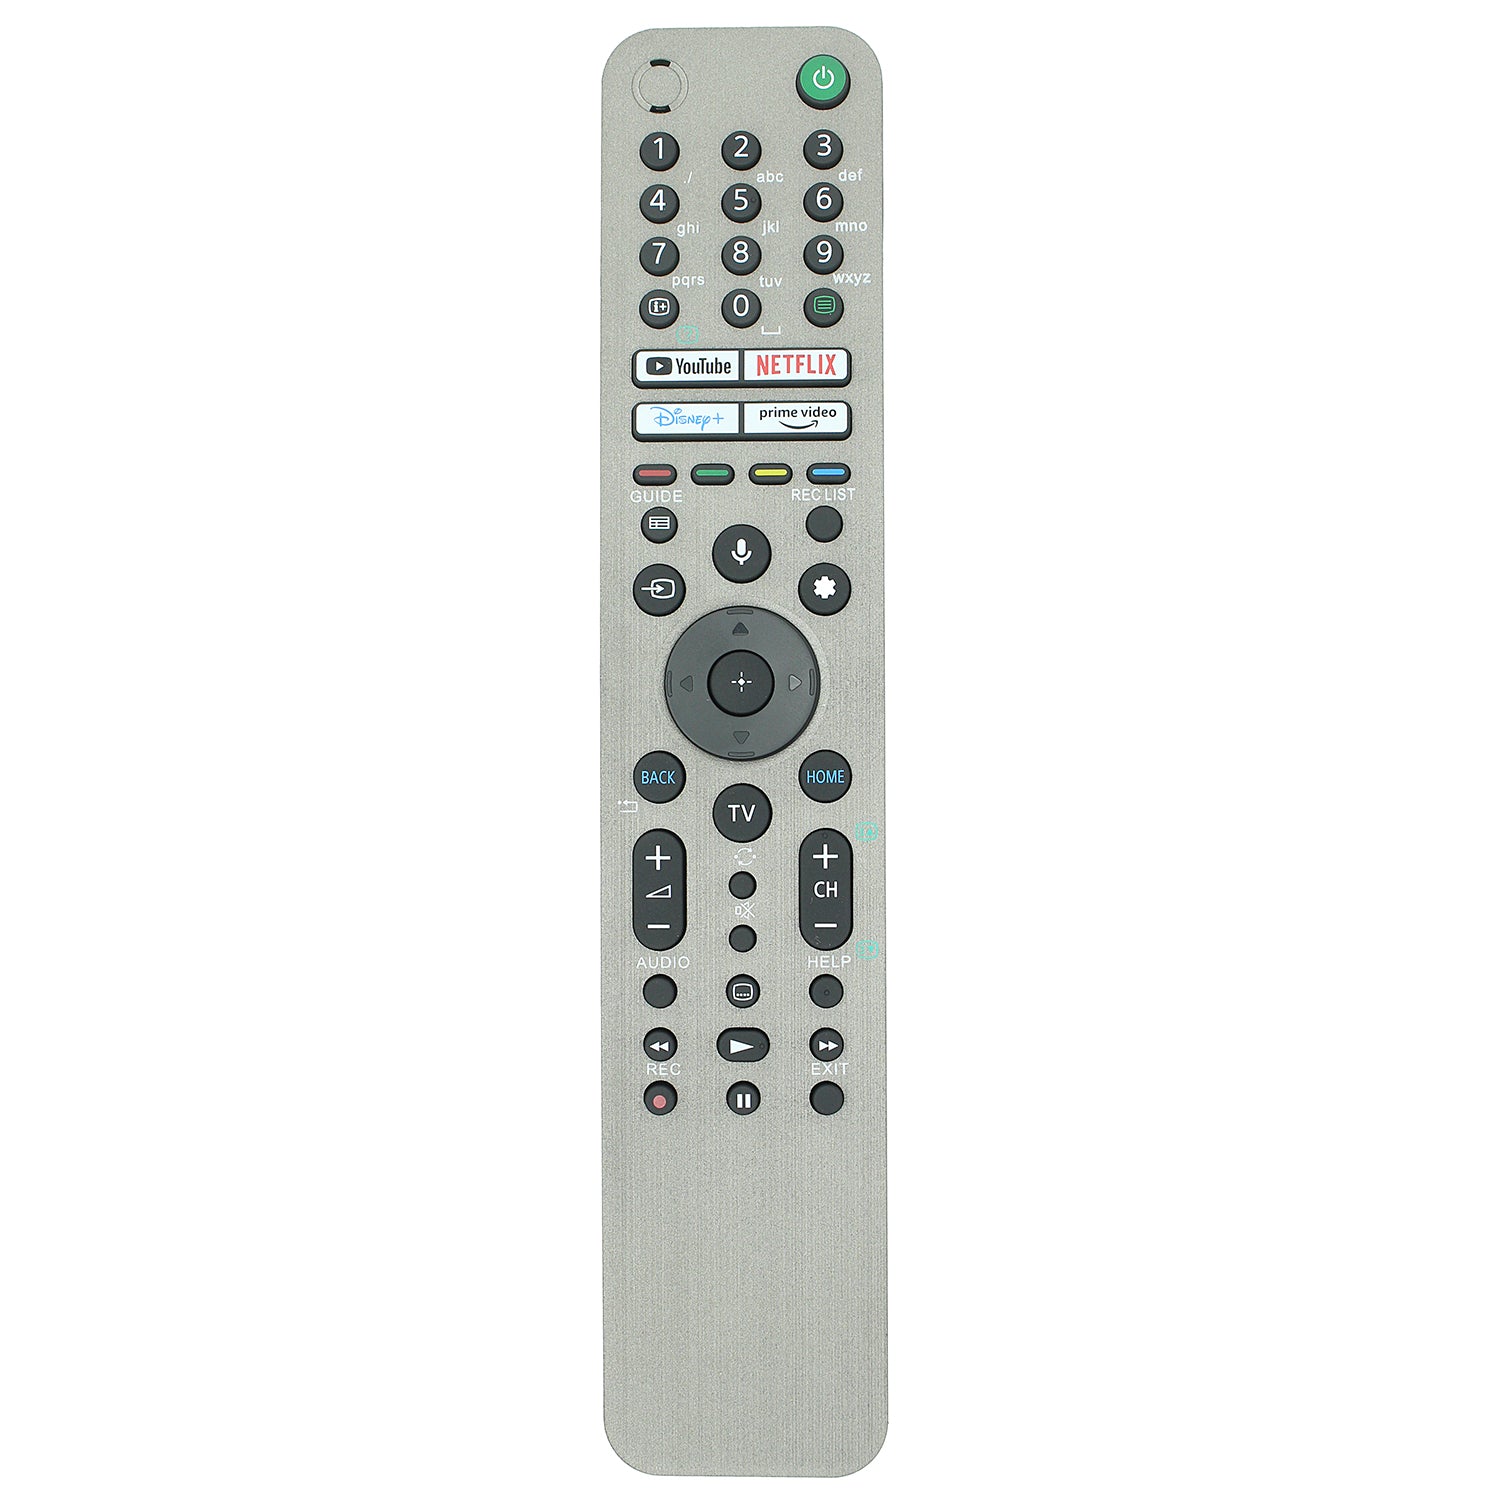 RMF-TX621P Voice Remote Control Replacement for Sony TV A80J